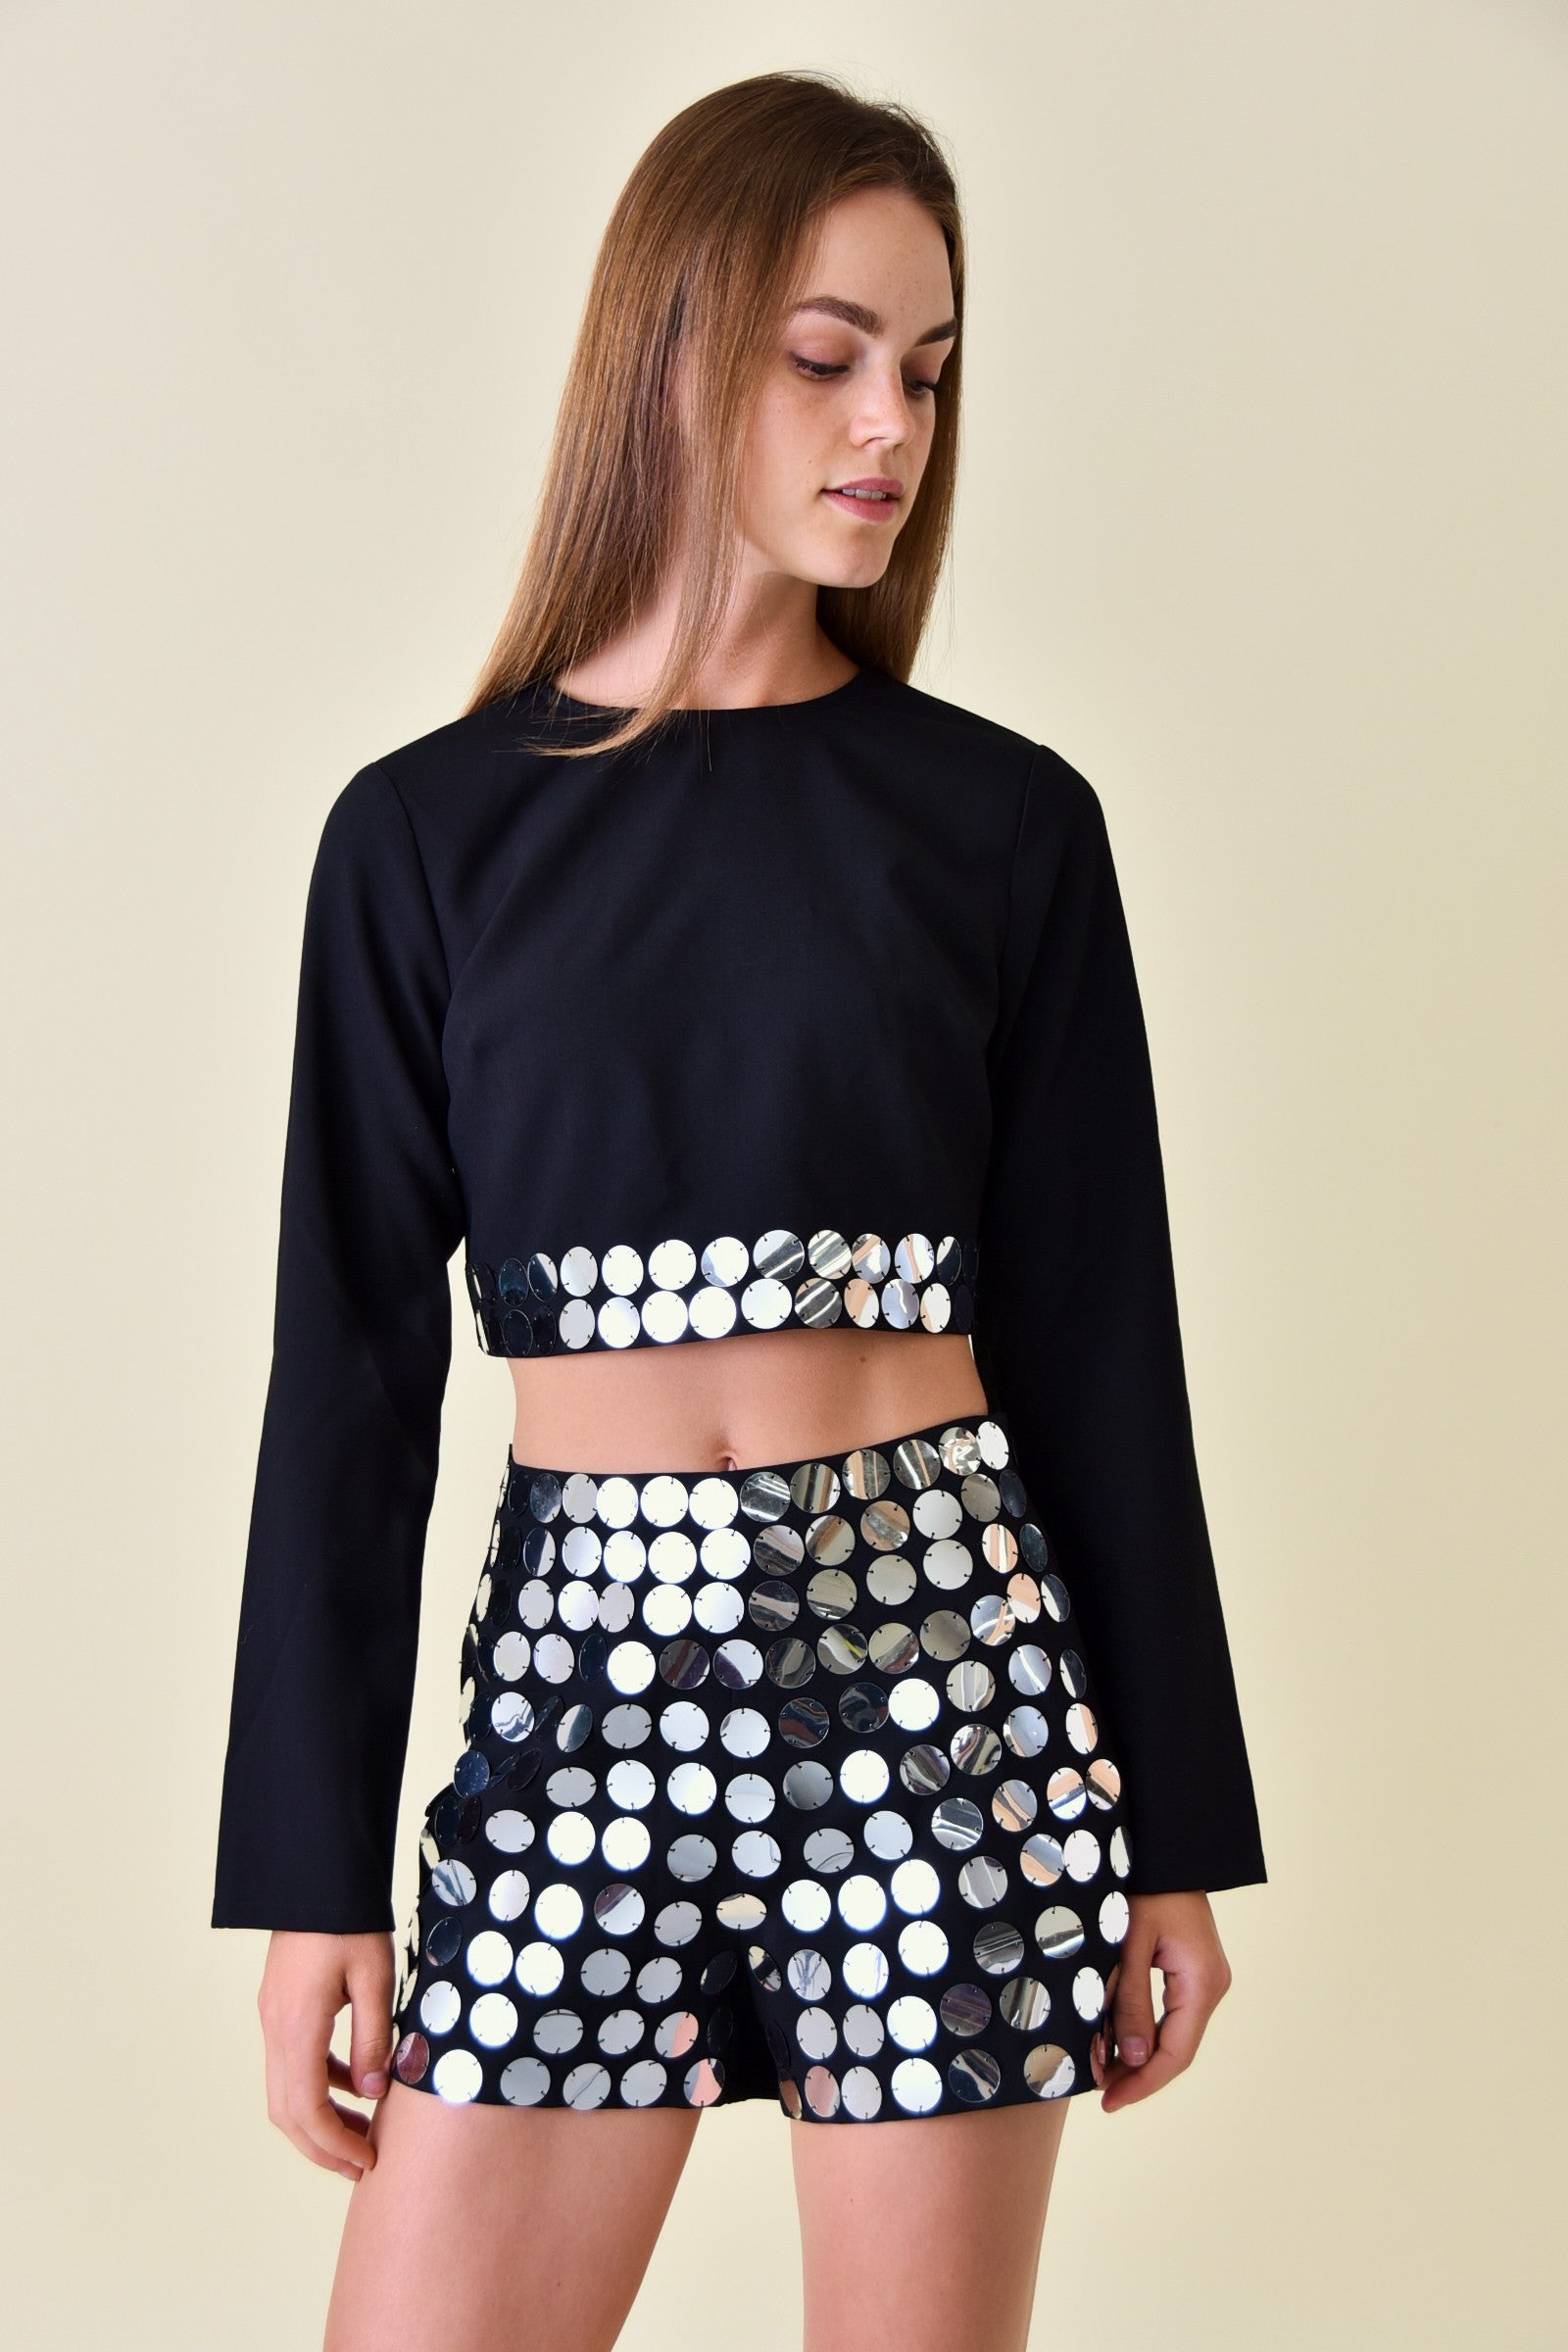  Other Stories embellished crop top with dot print in white